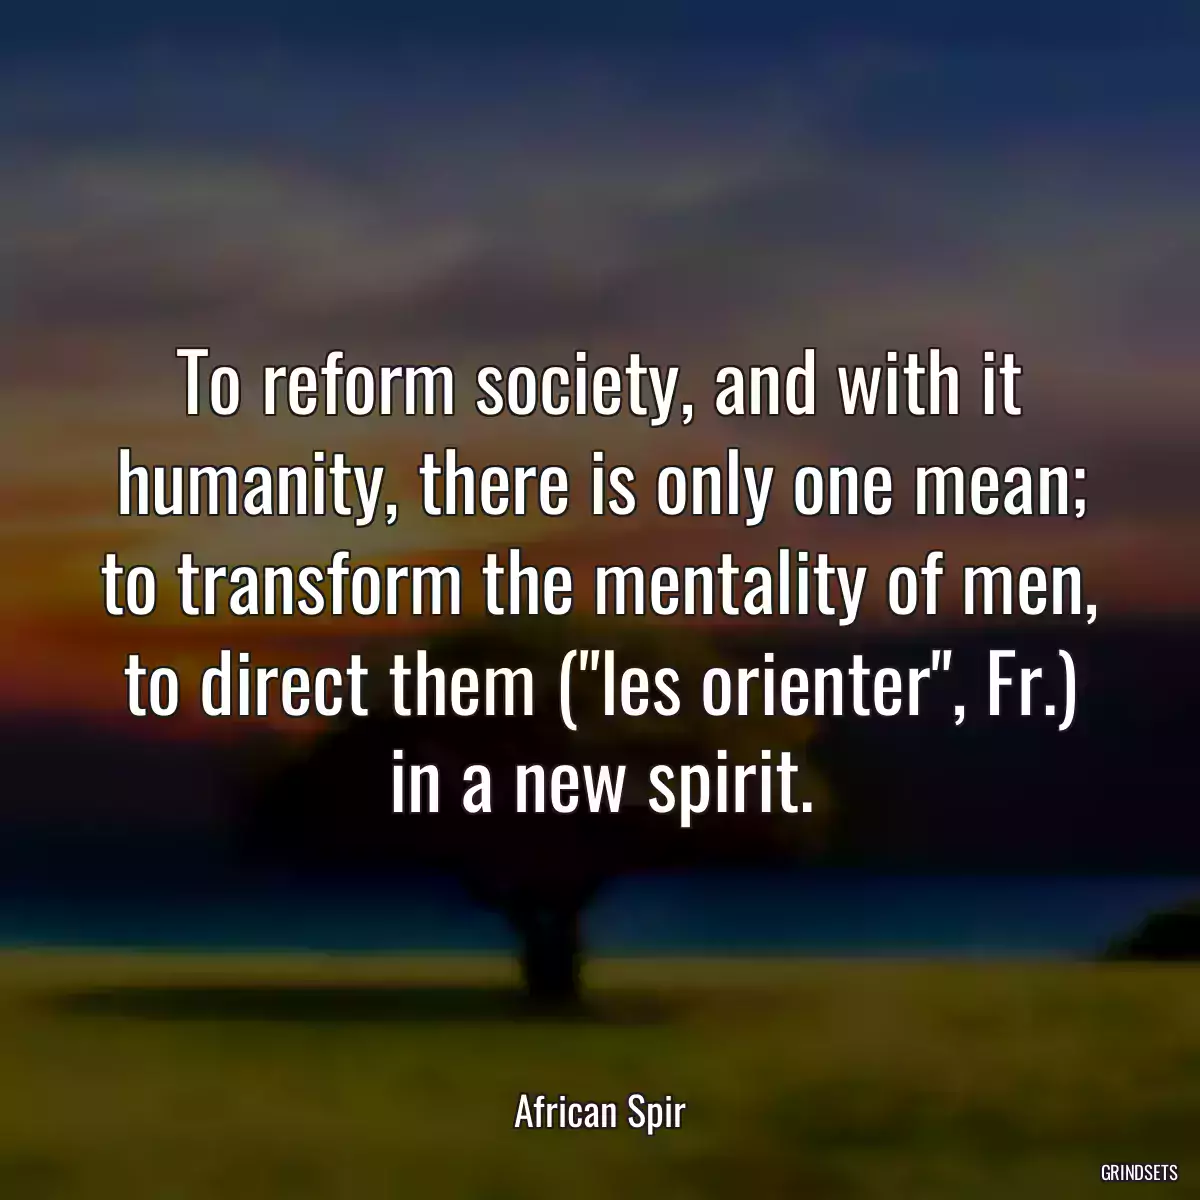 To reform society, and with it humanity, there is only one mean; to transform the mentality of men, to direct them (\